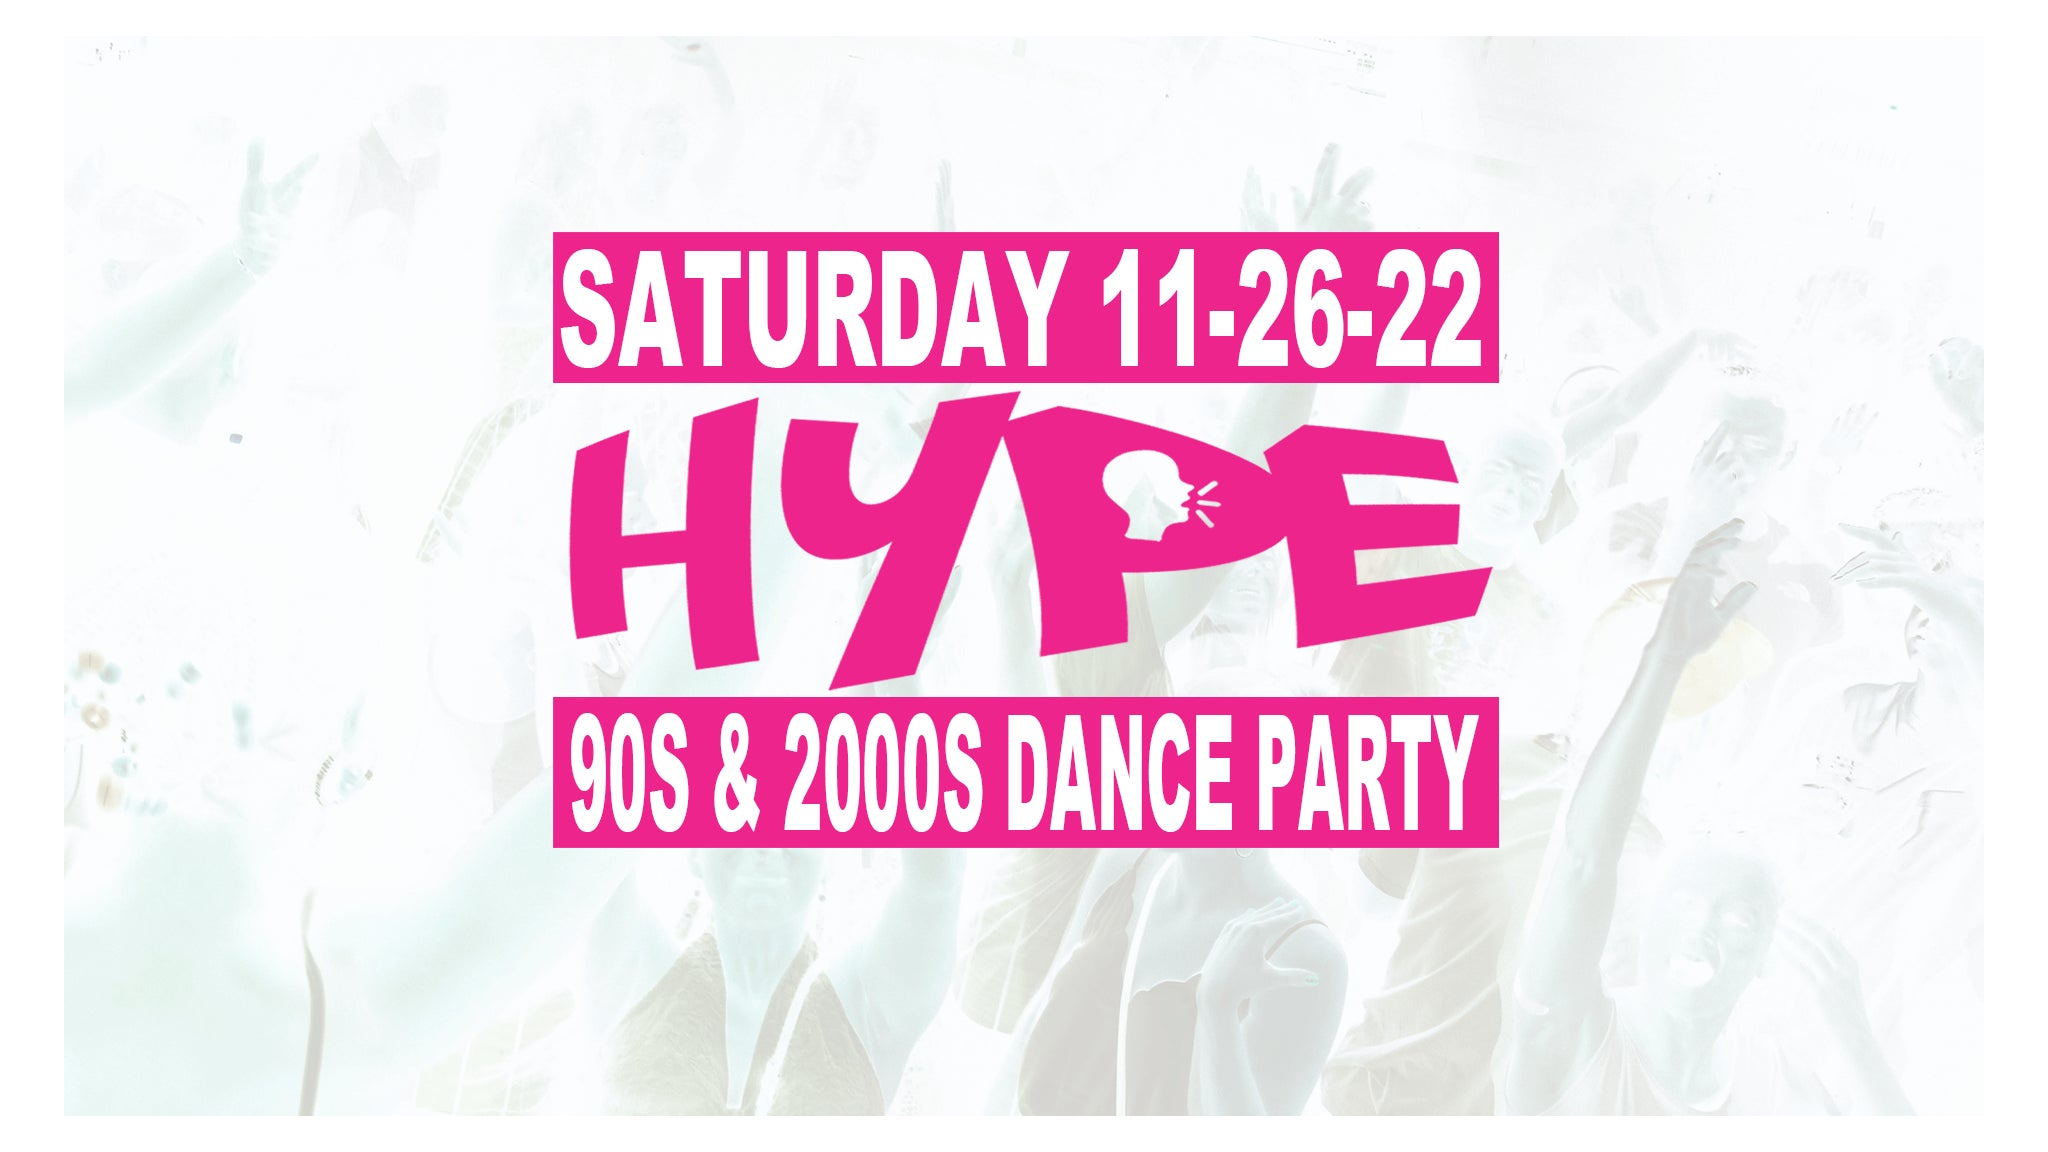 SORRY, THIS EVENT IS NO LONGER ACTIVE<br>Hype 90s & 2000s Dance Party at Ophelia's Electric Soapbox - Denver, CO 80202